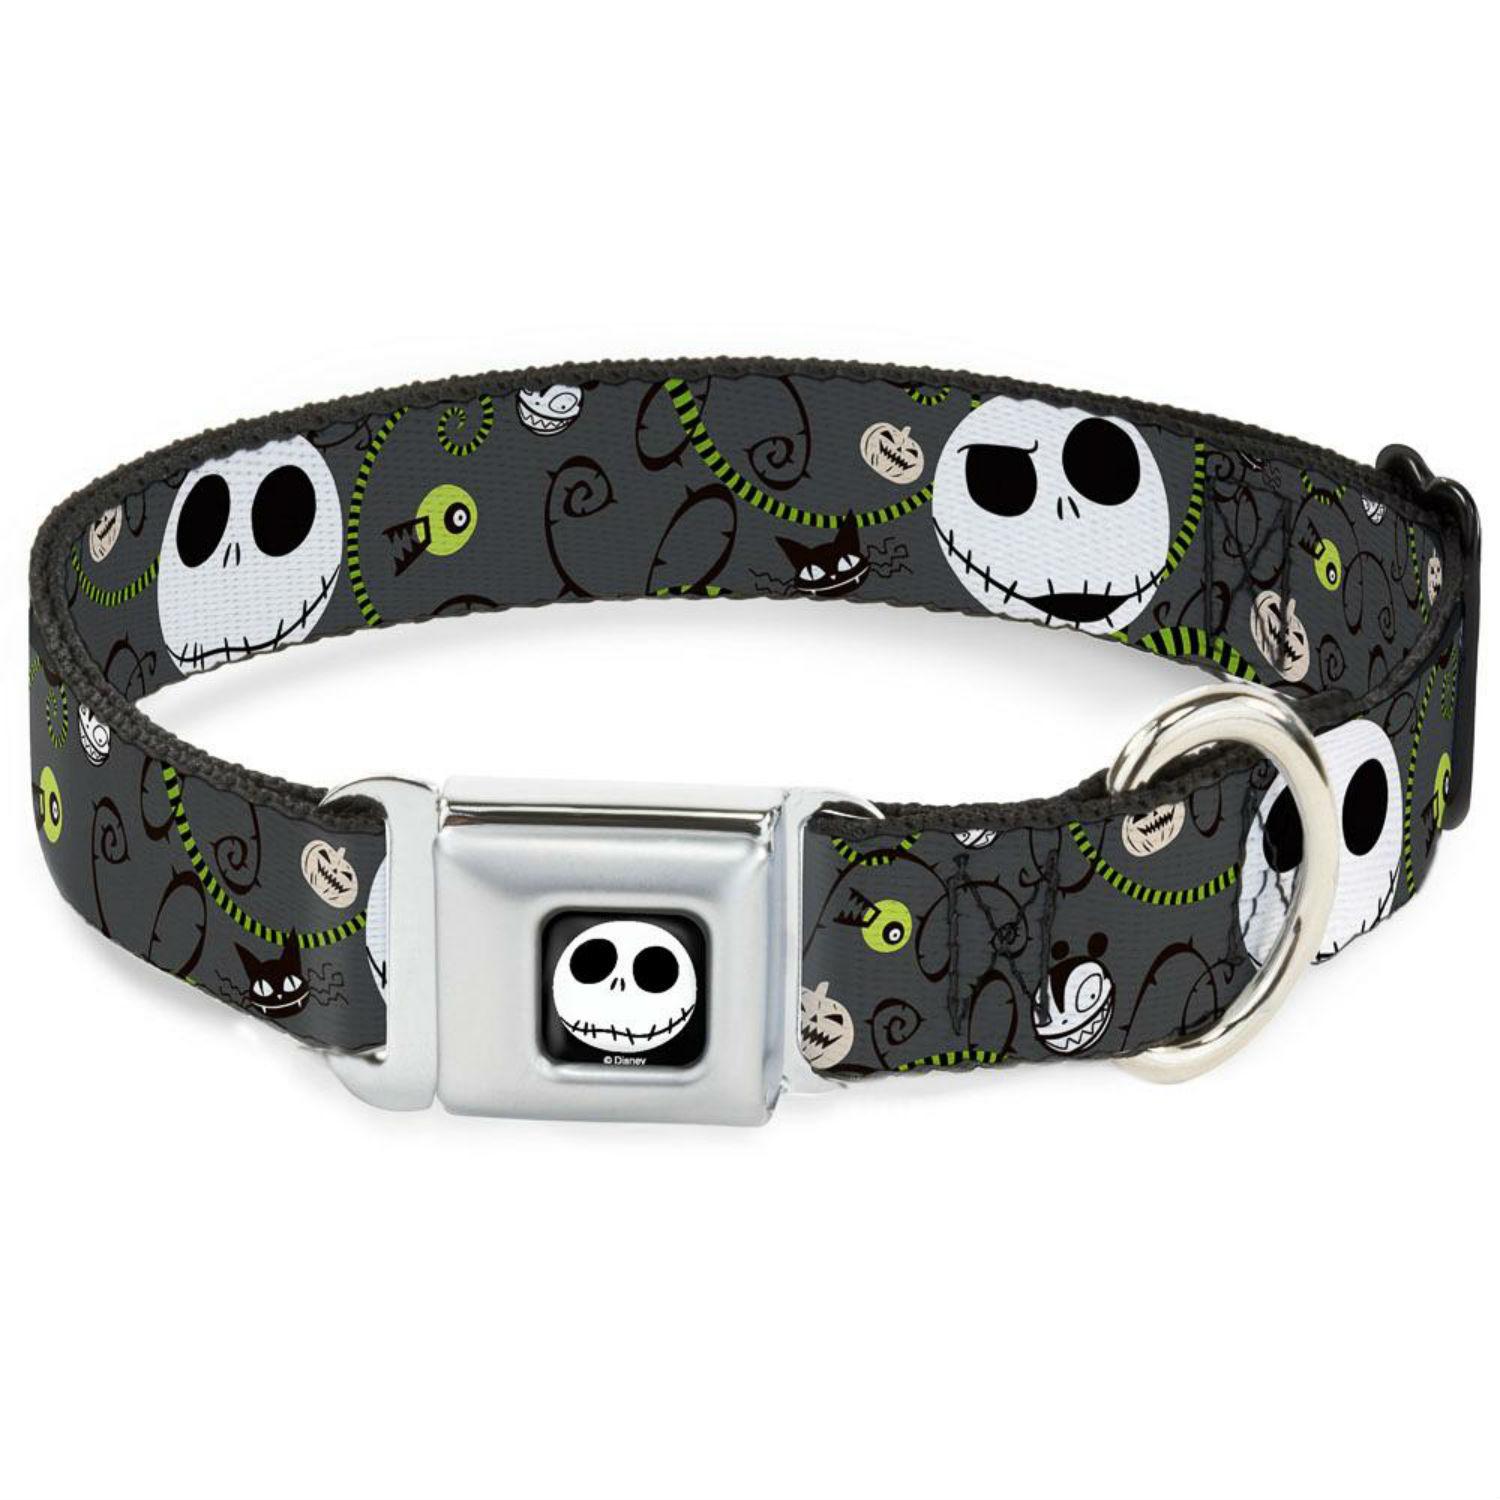 Nightmare Before Christmas Seatbelt Buckle Dog Collar by Buckle-Down - Gray